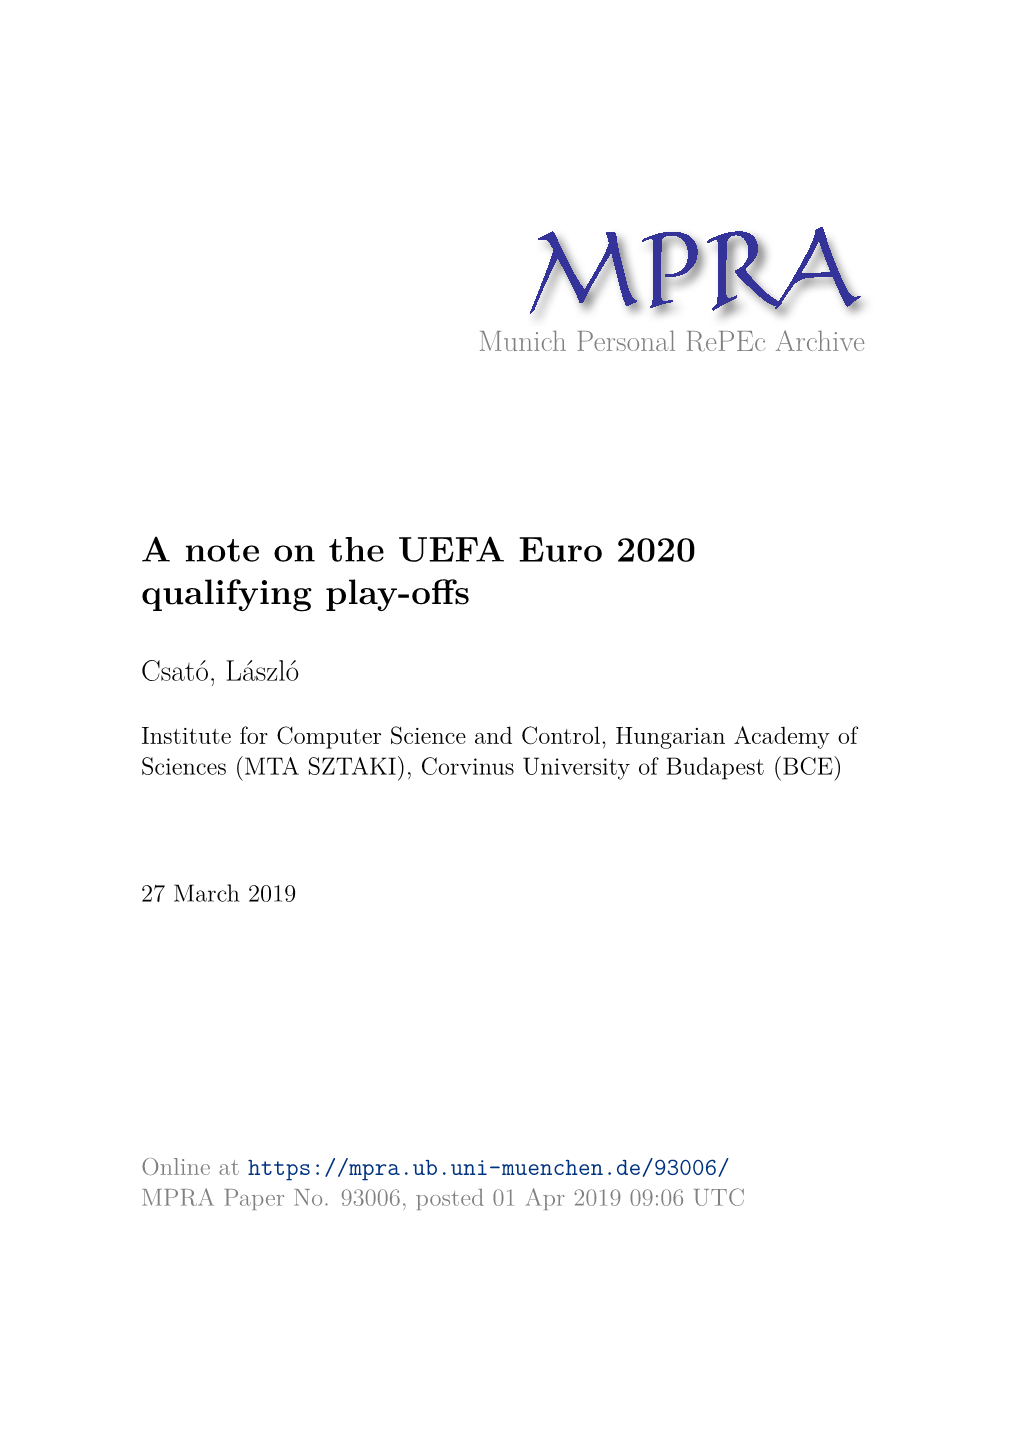 A Note on the UEFA Euro 2020 Qualifying Play-Offs